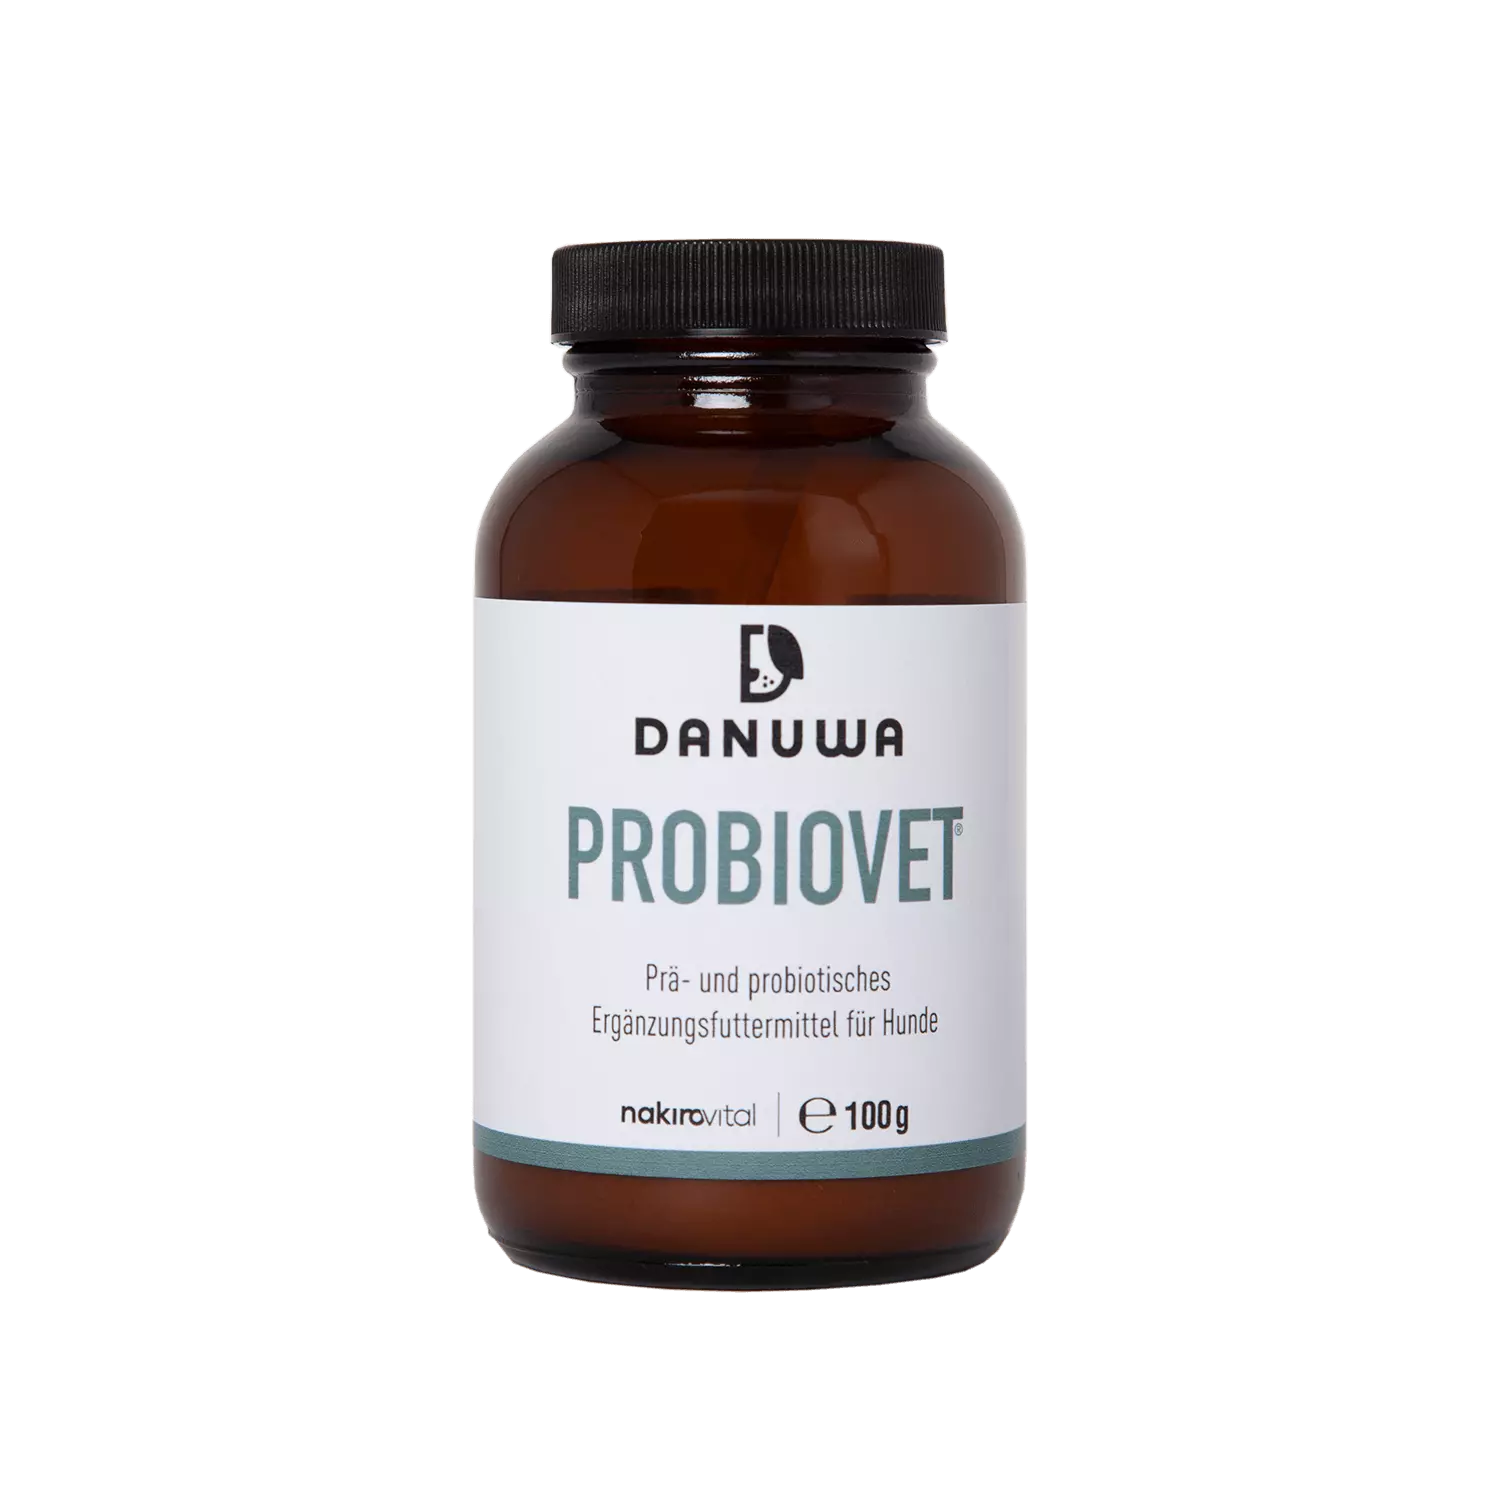 DANUWA Probiovet® - Pre- and probiotic supplementary feed for dogs